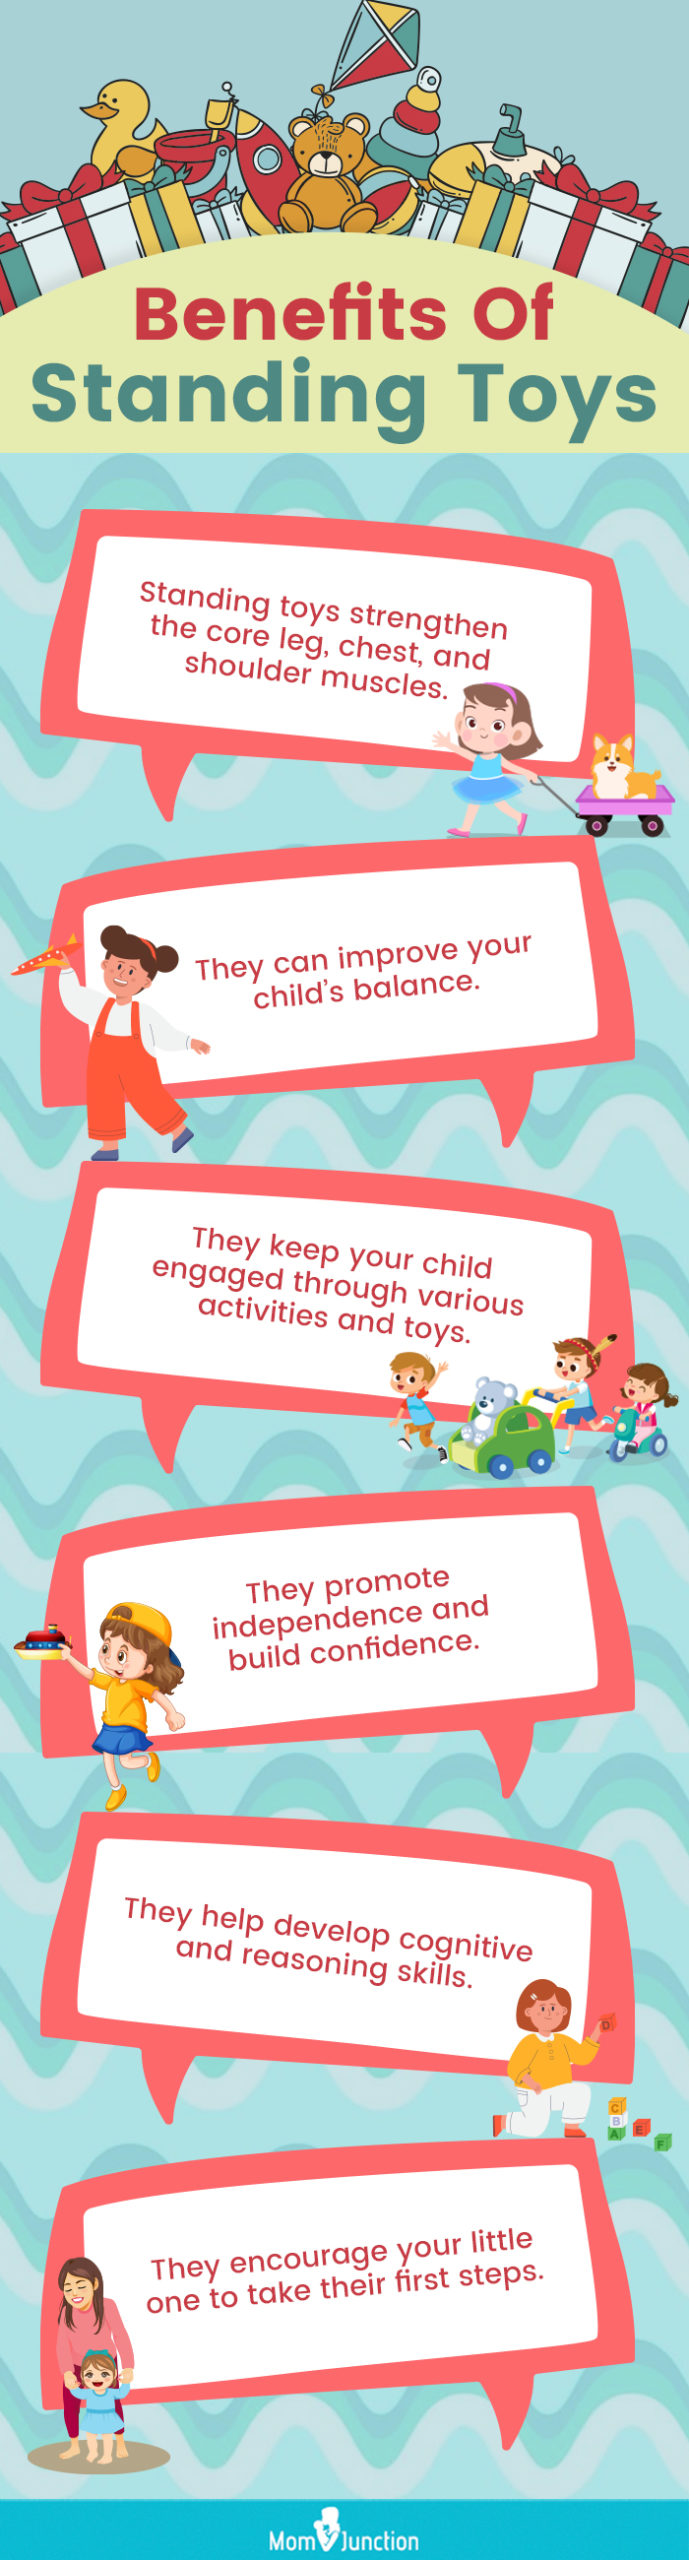 Benefits Of Standing Toys (infographic)